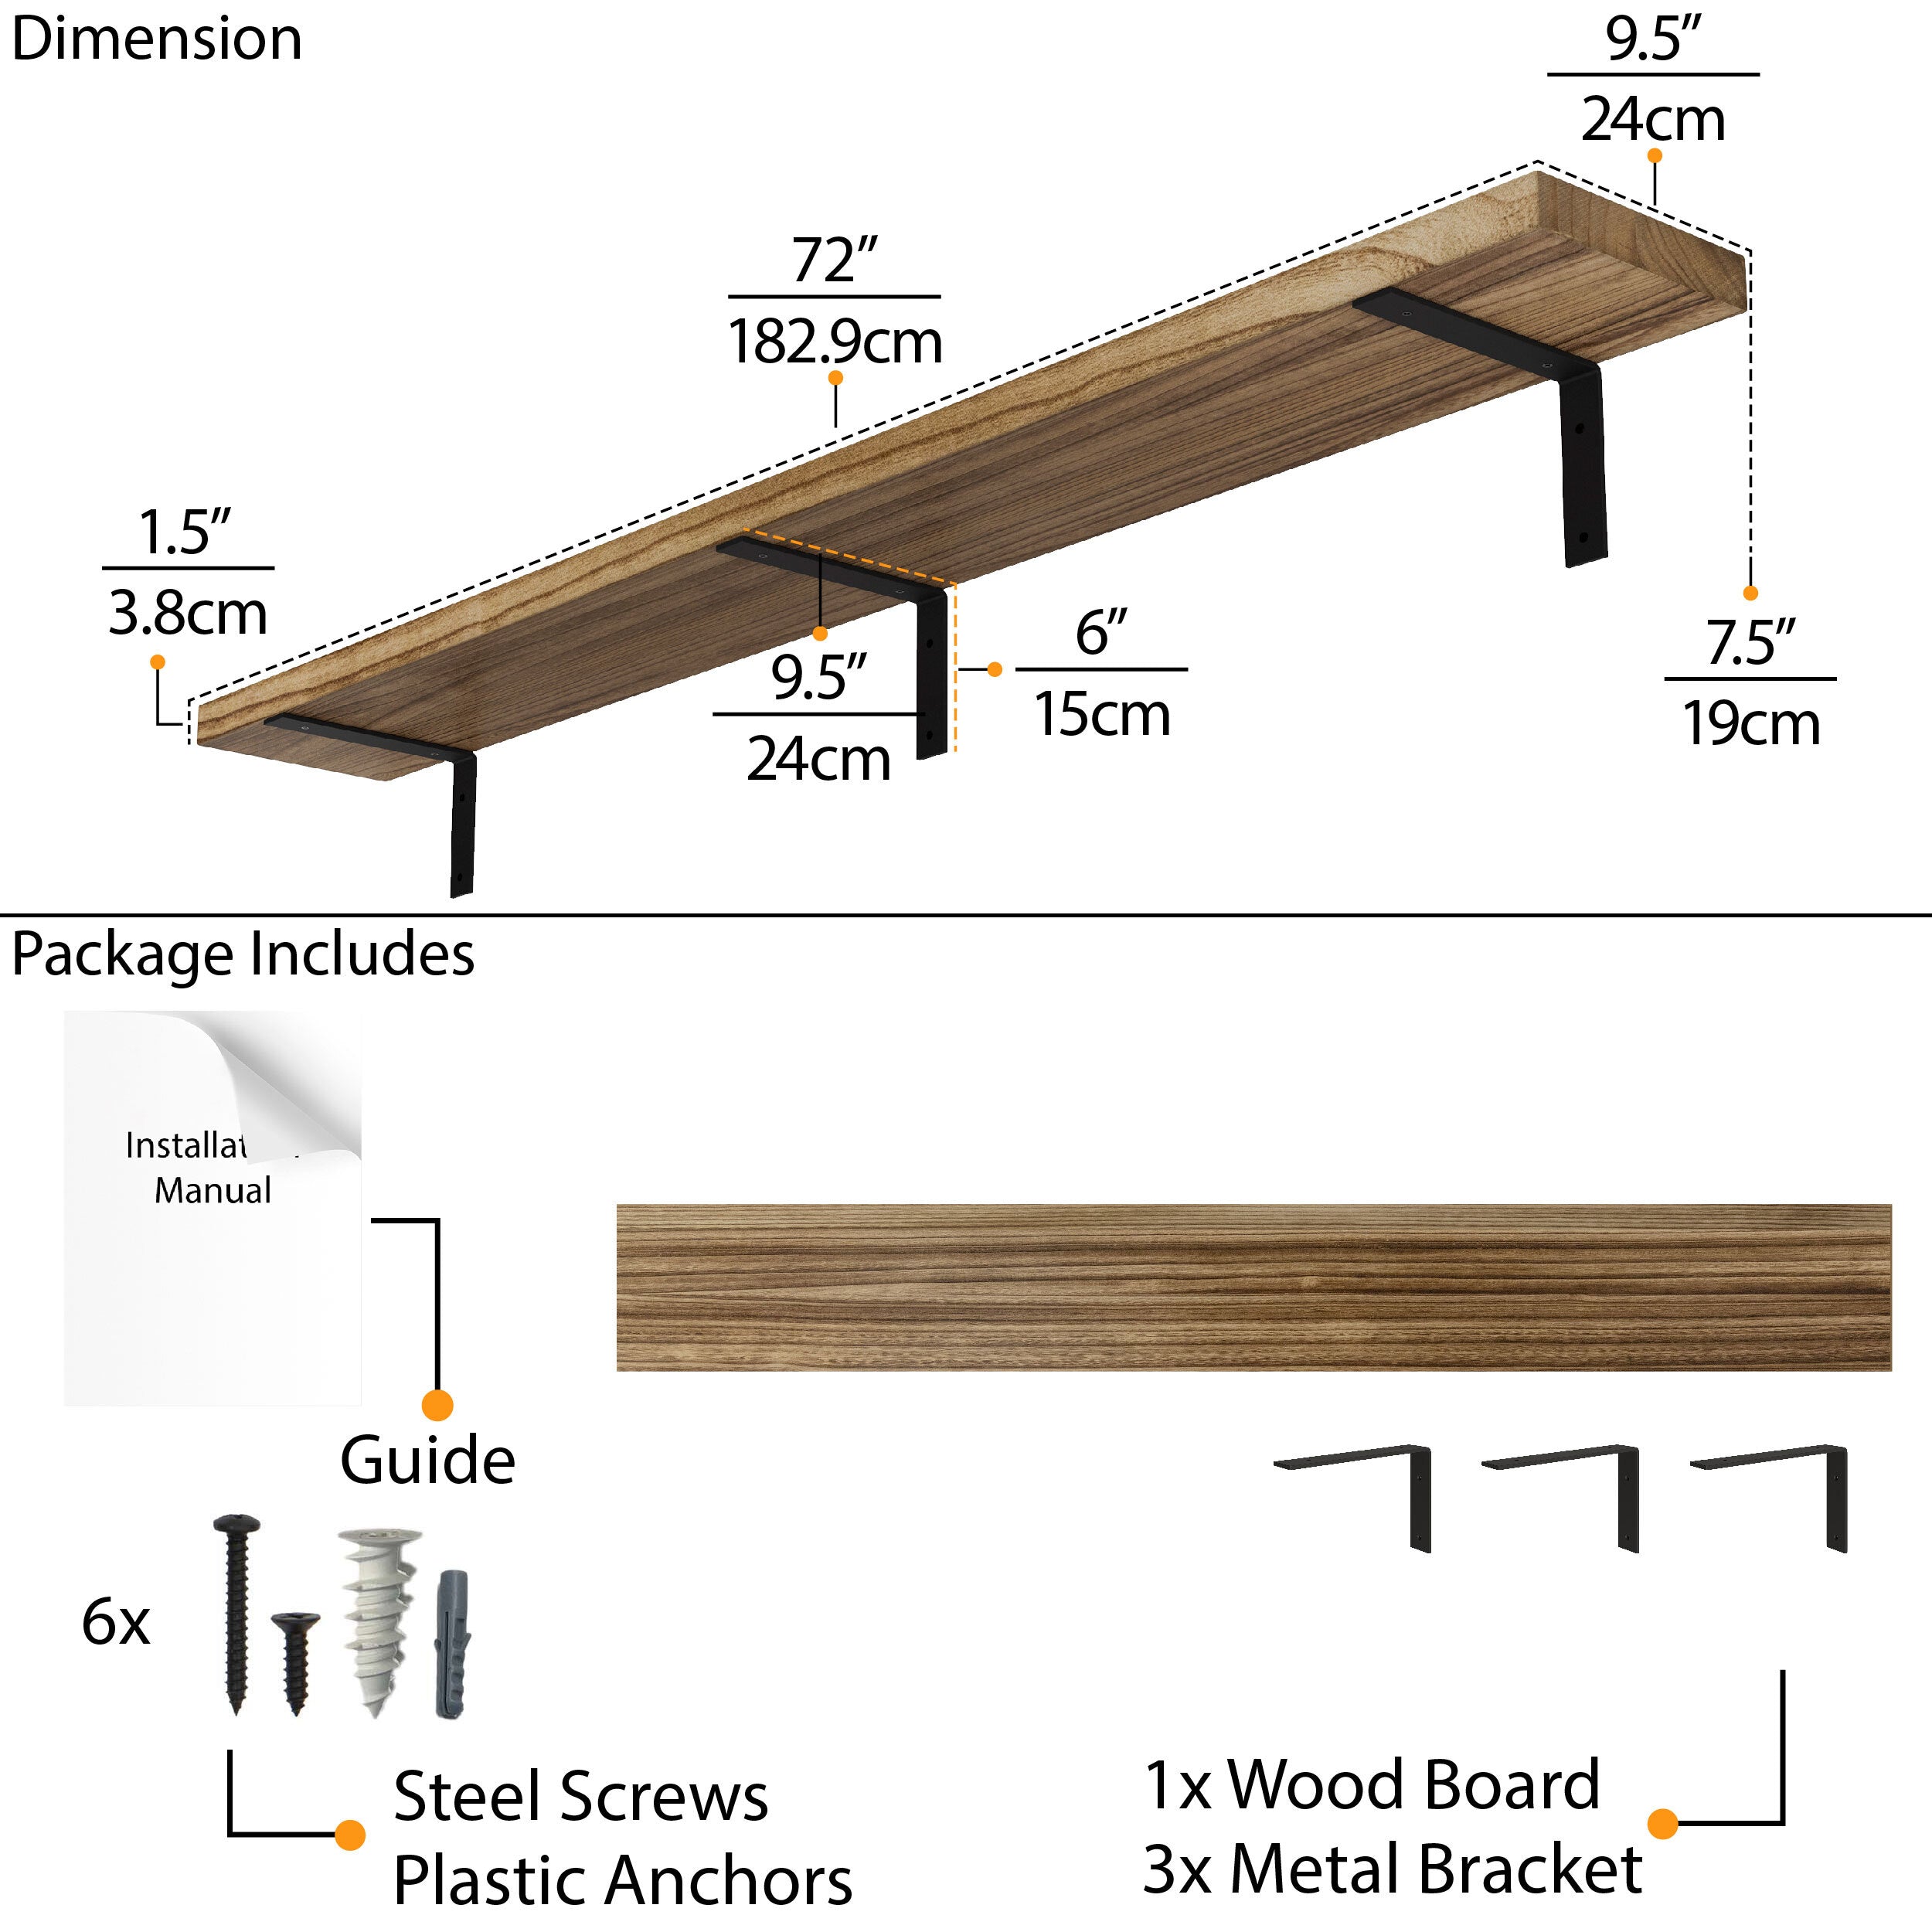 Diagram showing the dimensions and contents of a 72'' long floating shelf package, including a wood board, metal brackets, and installation hardware.